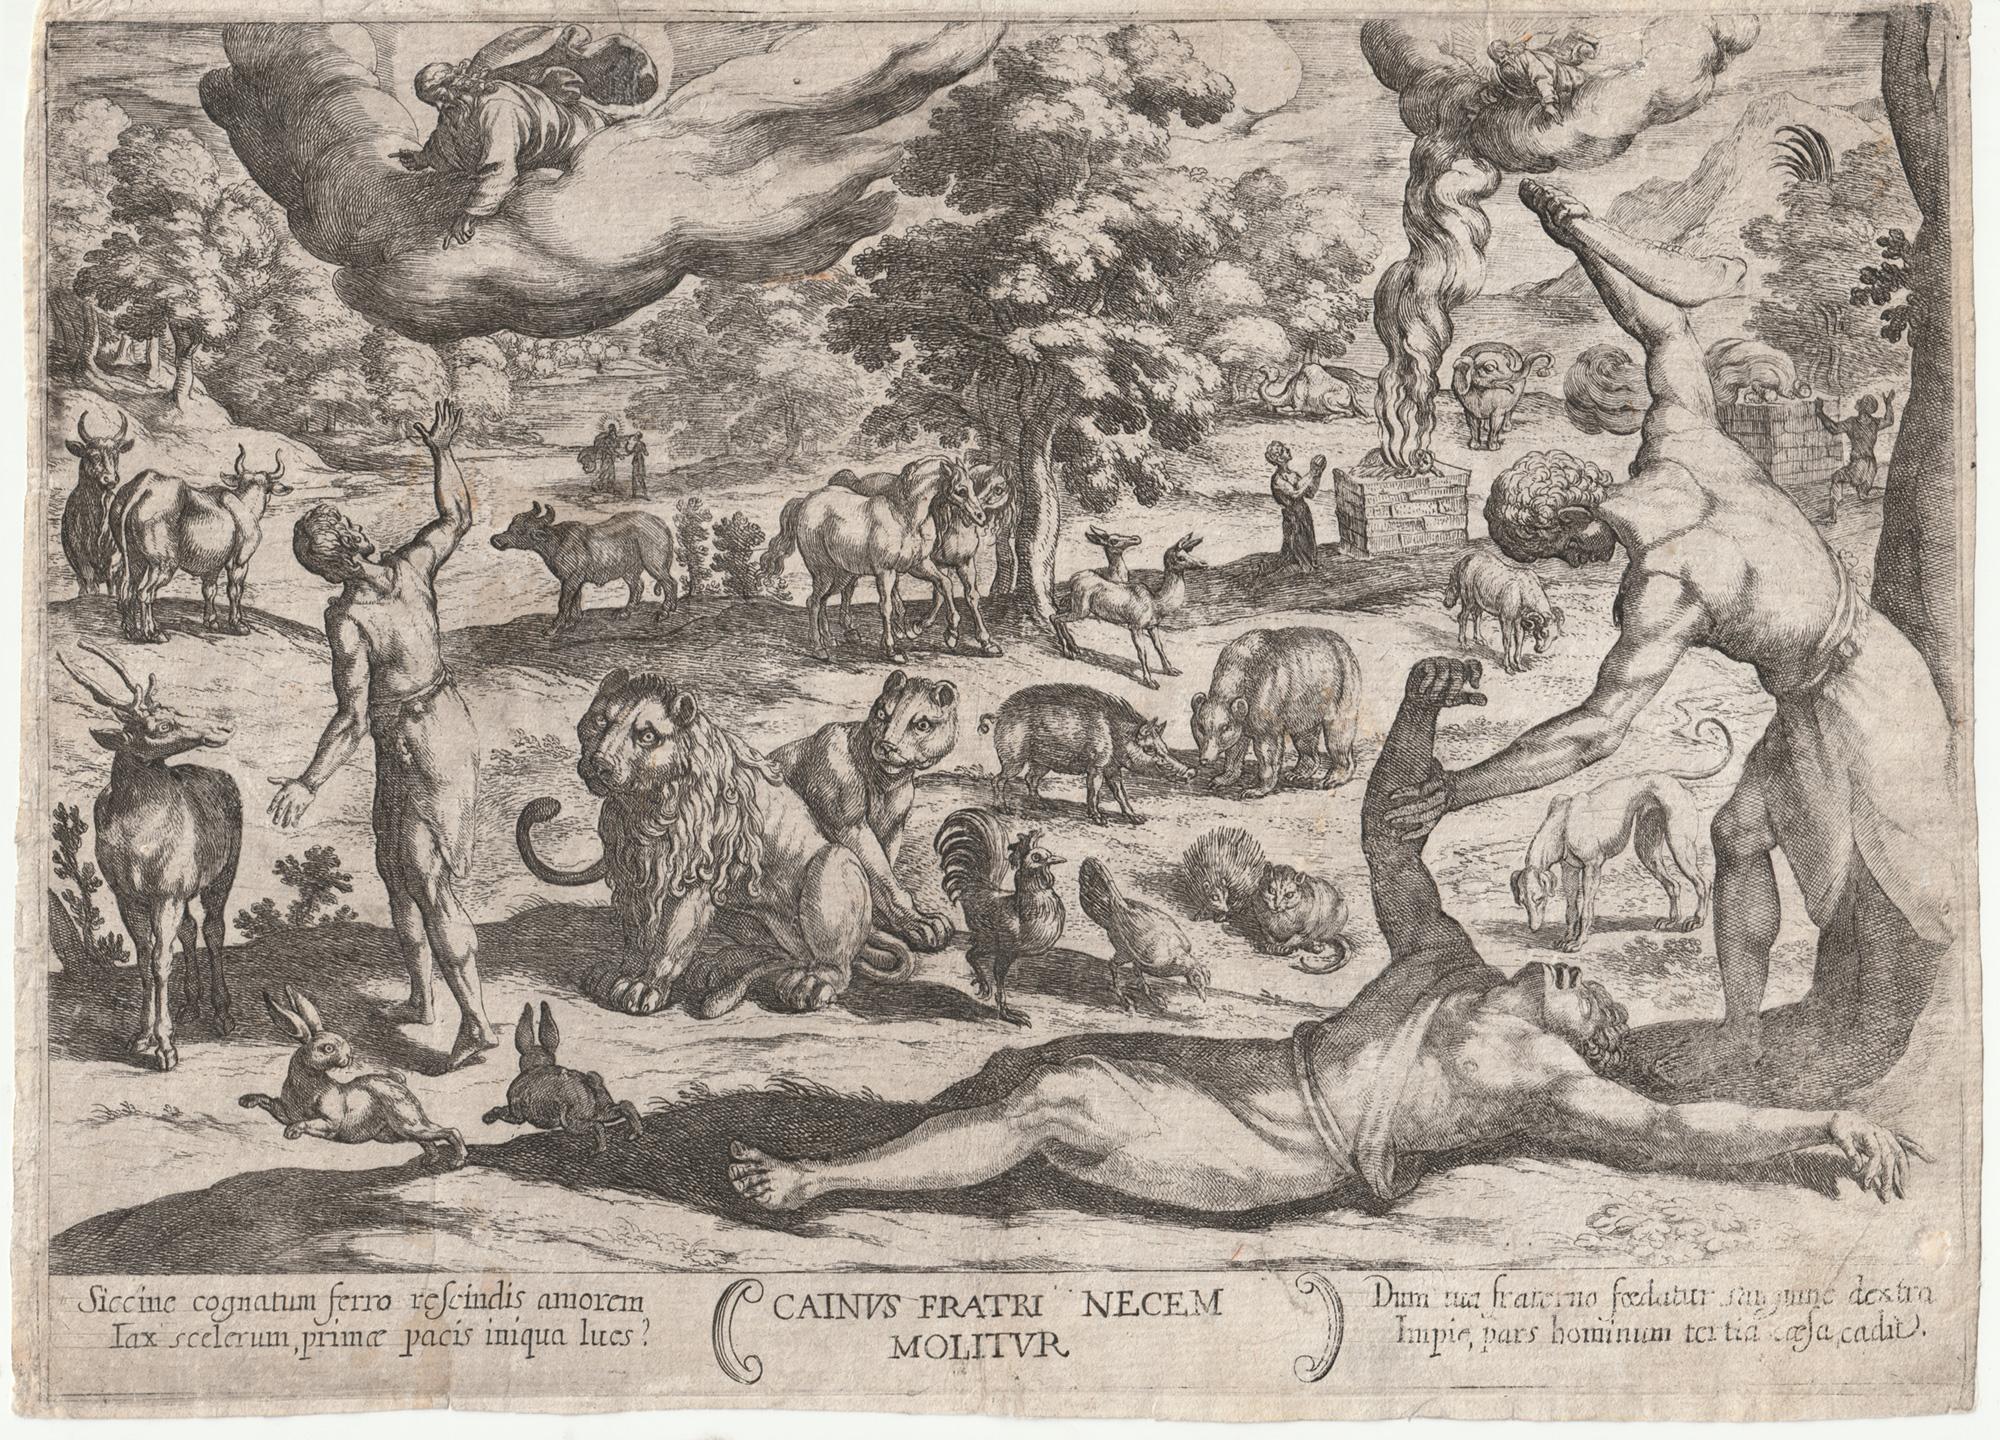 Cainus fratri necem molitur (Cain kills his brother), Plate I from Battles from 